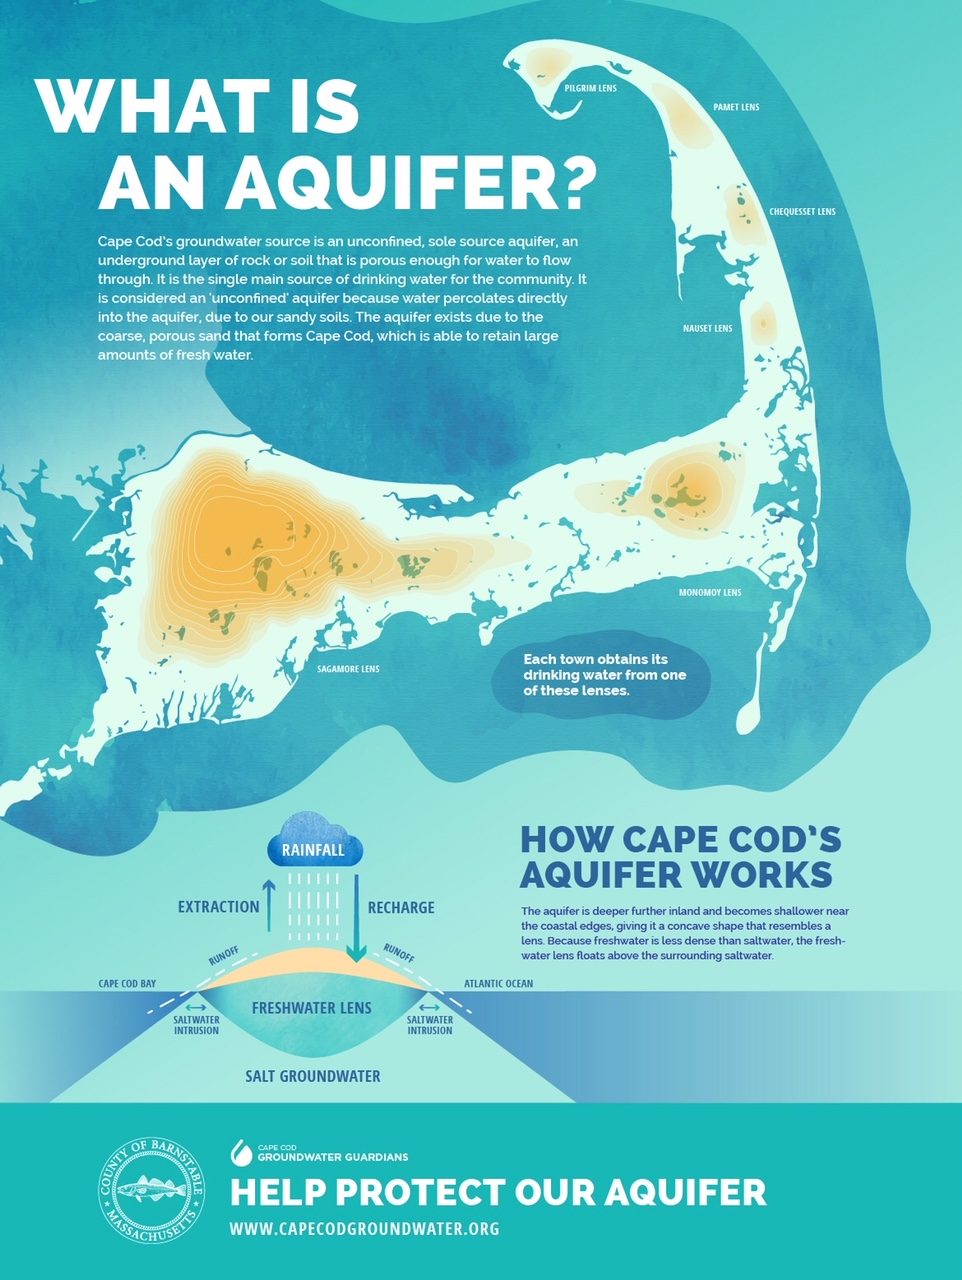 http://www.capecodgroundwater.org/wp-content/uploads/2018/05/CC-Groundwater-Guardians-What-is-an-Aquifer-web72-962x1280.jpg